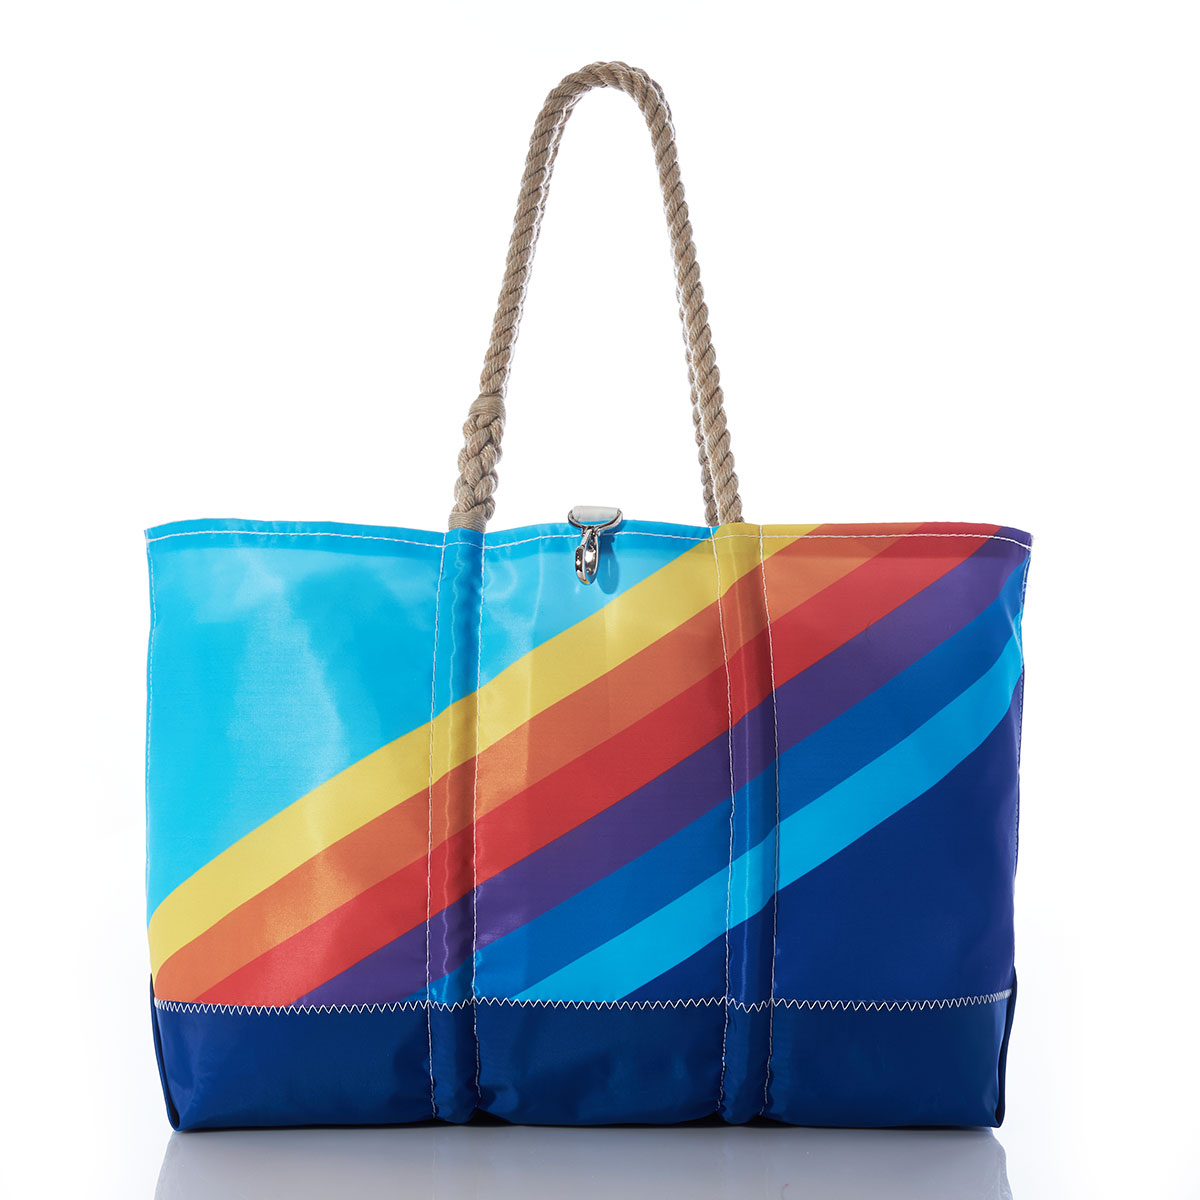 front view of a recycled sail cloth ogunquit beach tote which is printed with retro stripes that range from light blue in the top left corner to dark blue in the bottom right corner, with rainbow colored stripes in between